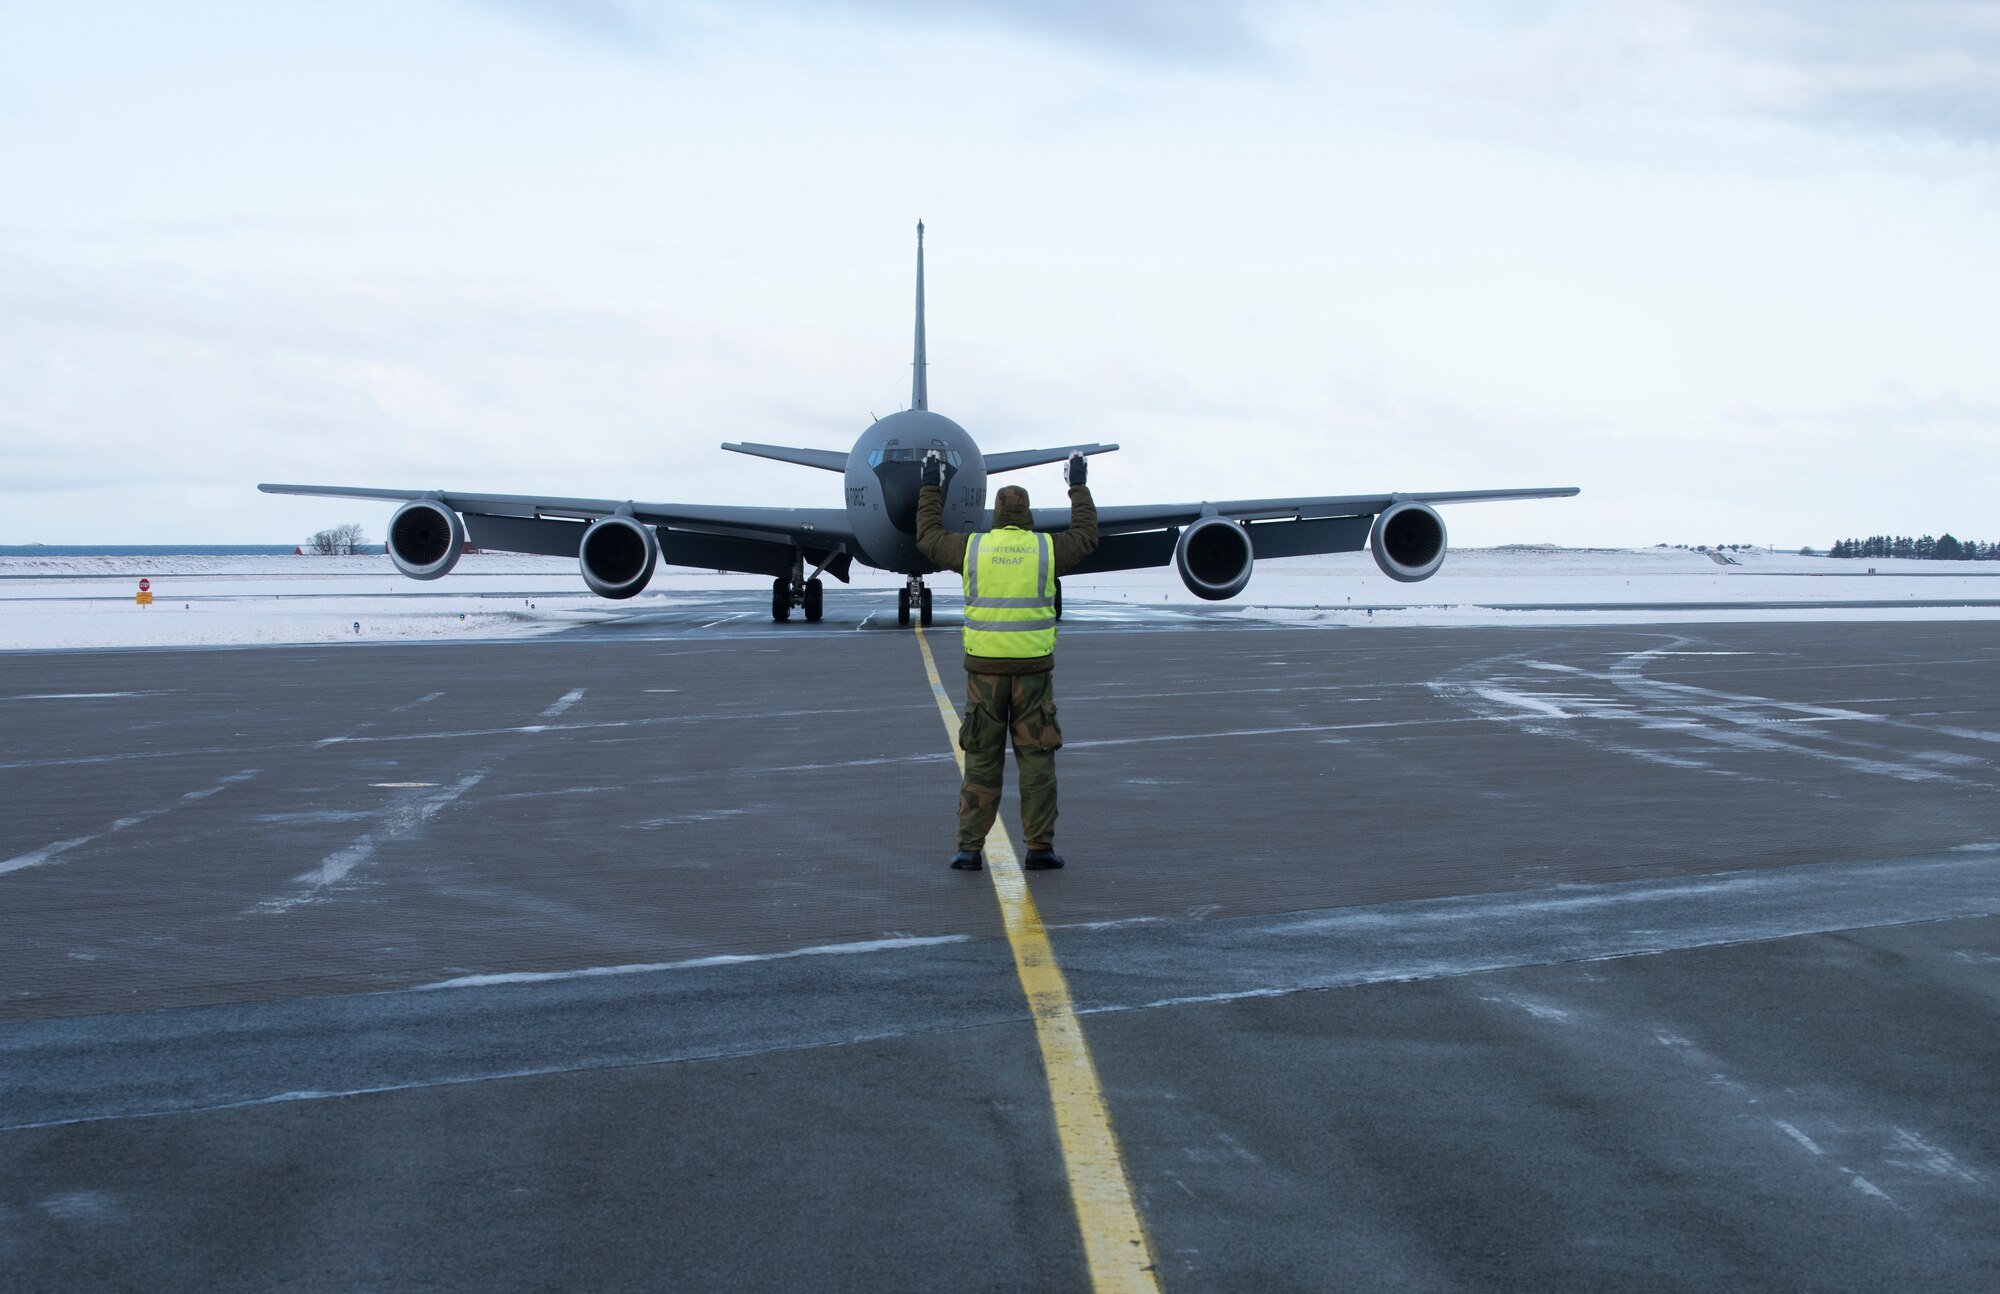 Airmen taxiing military refueling aircraft.